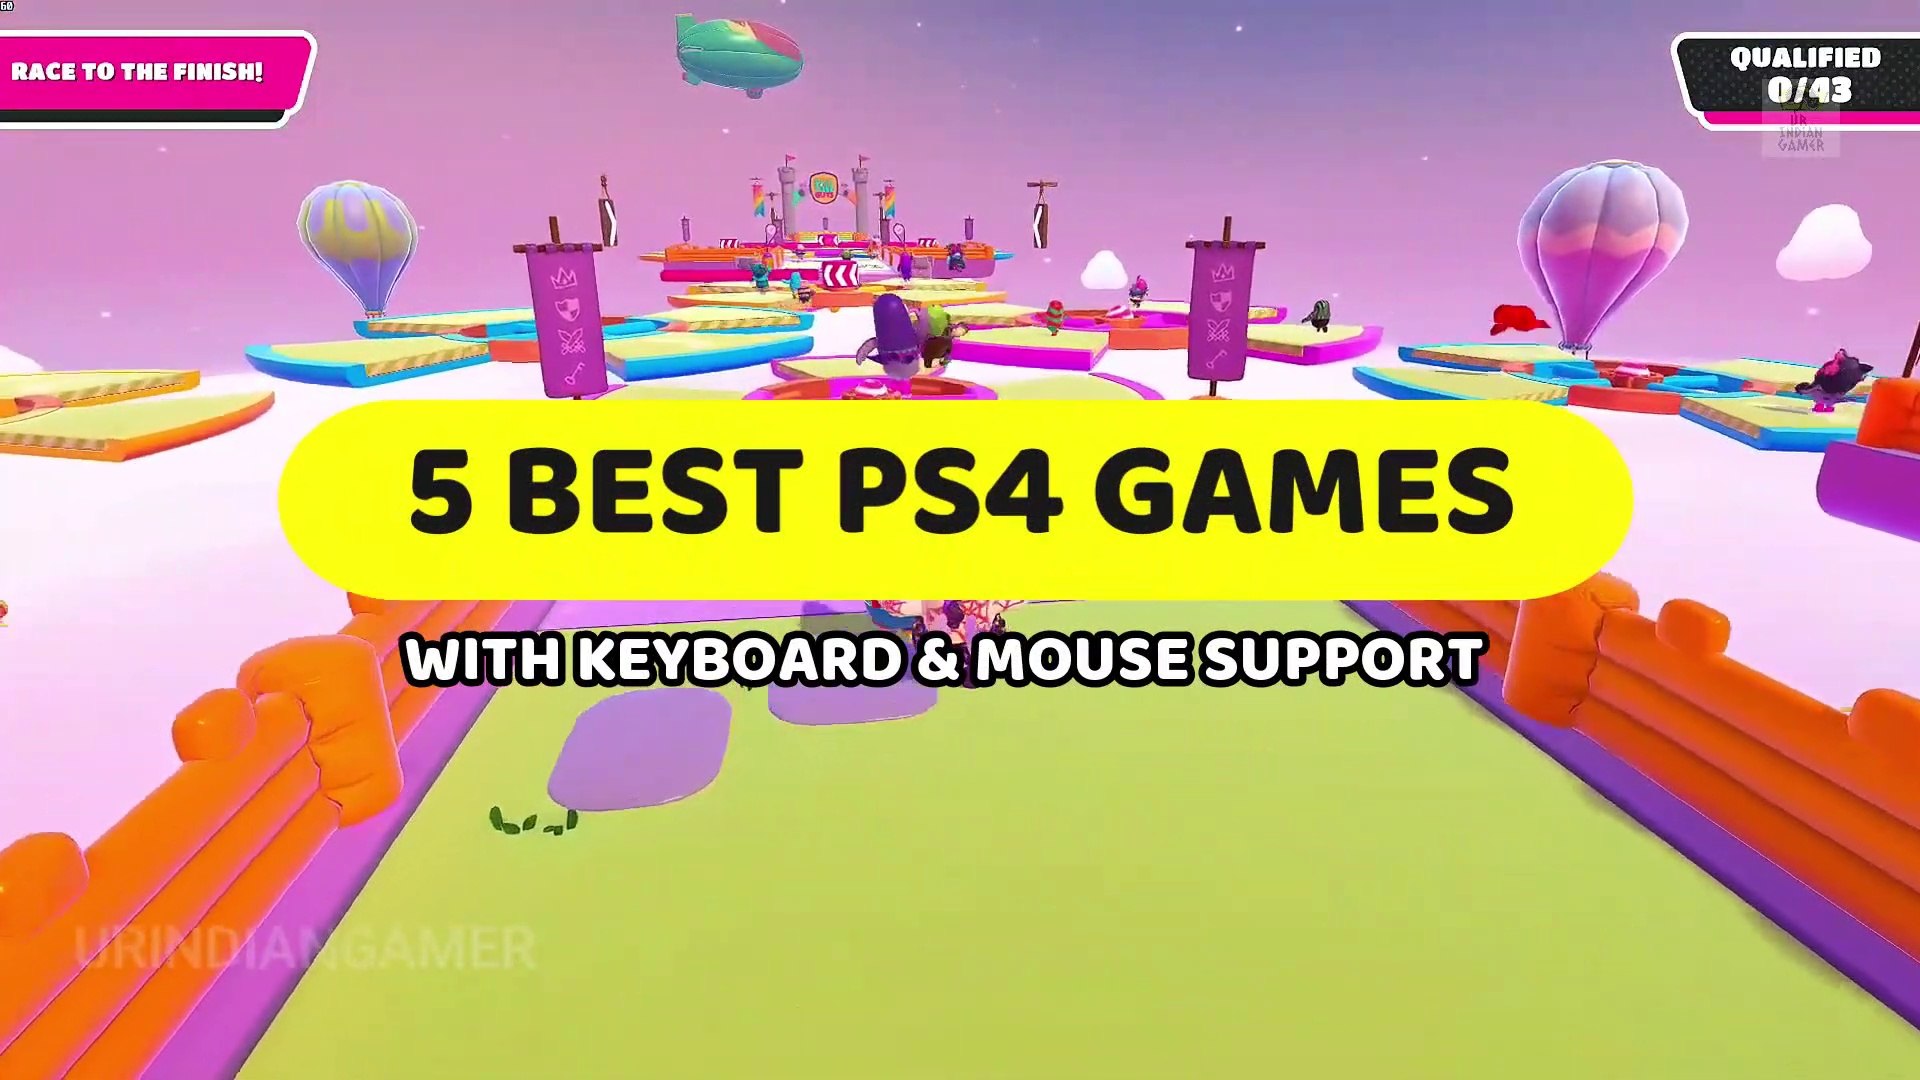 5 Best PS4 Games with Keyboard And Mouse Support - PS4 Games with Keyboard  And Mouse Support- Part 1 - video Dailymotion